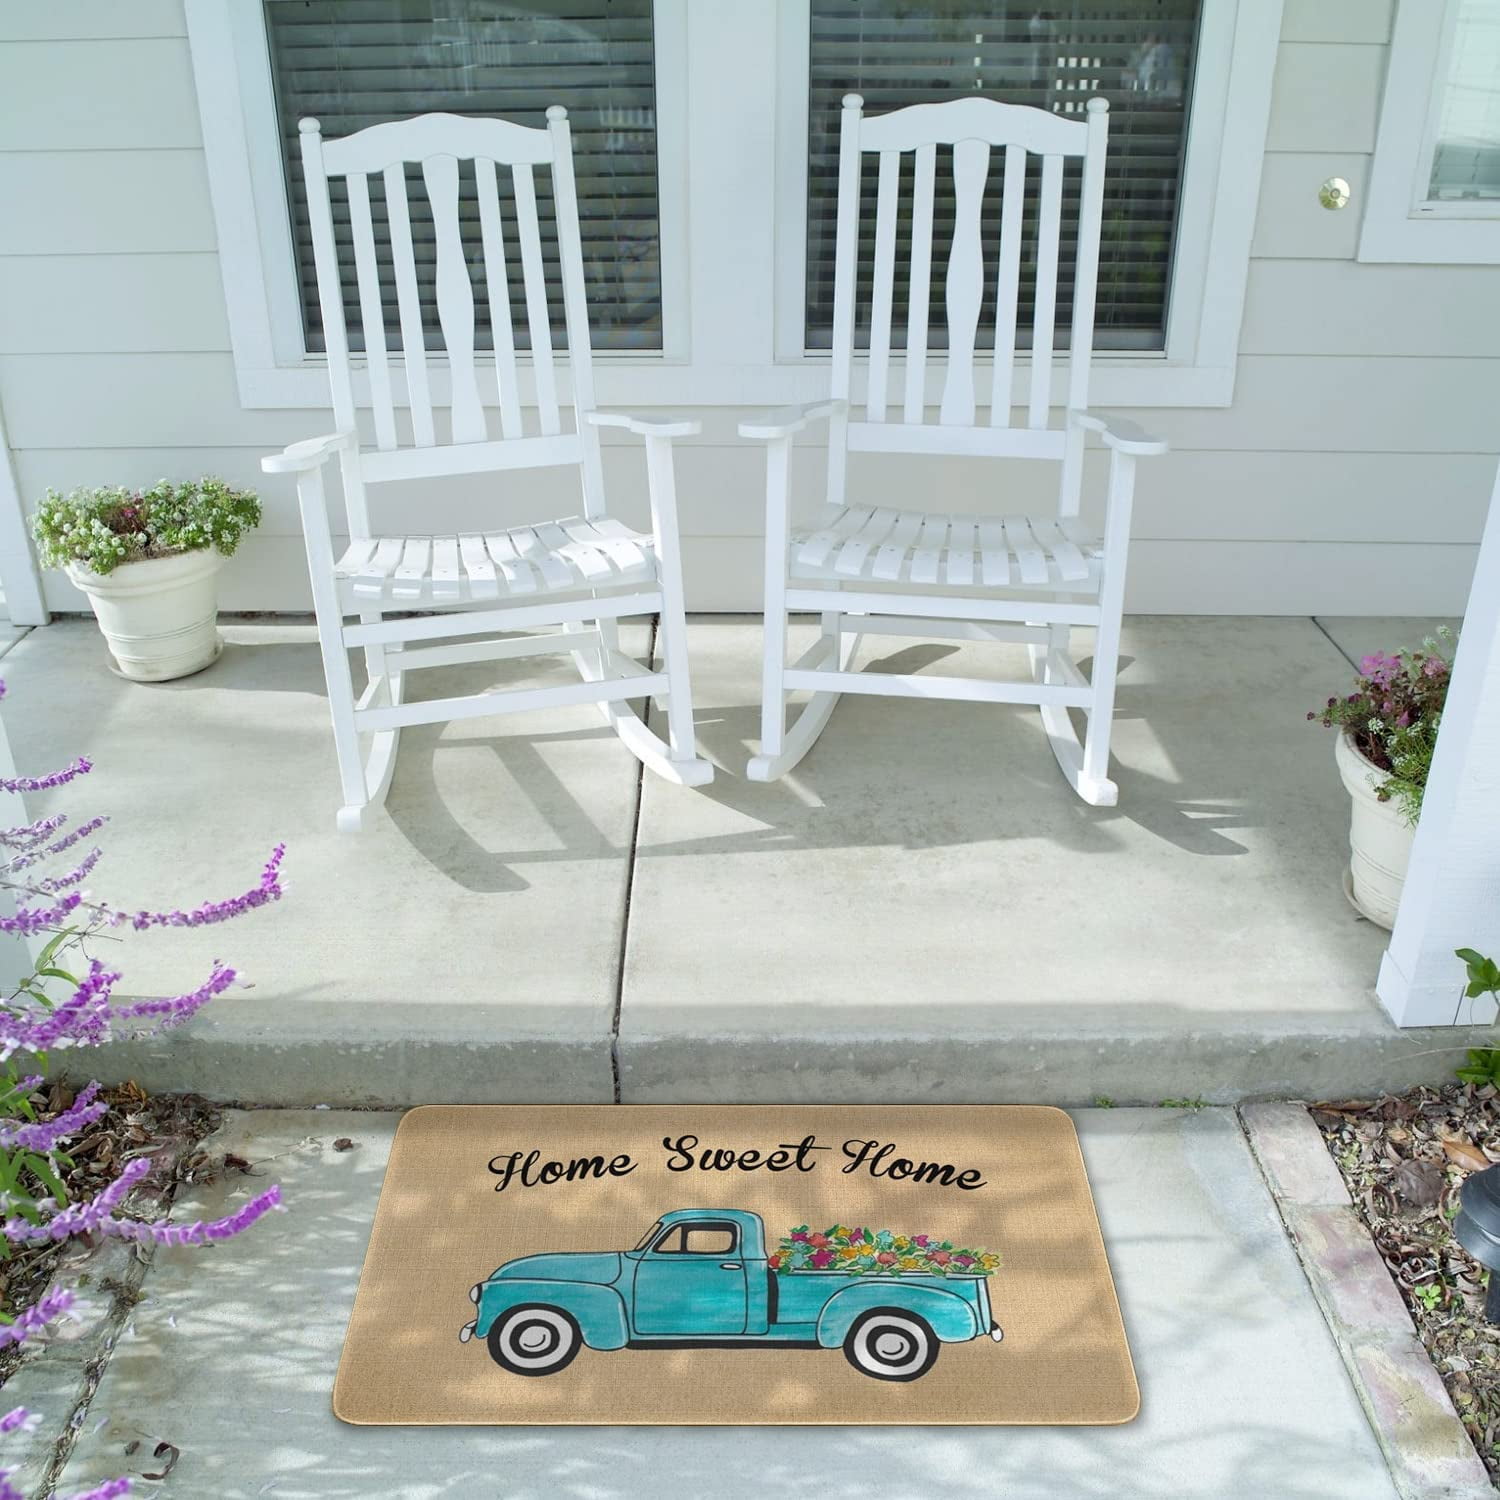 Custom Funny Doormat Home Sweet Apartment A Personalized Welcome Indoor  Outdoor Entrance Rubber Non-Slip Mat Rug Decor 30 X 18